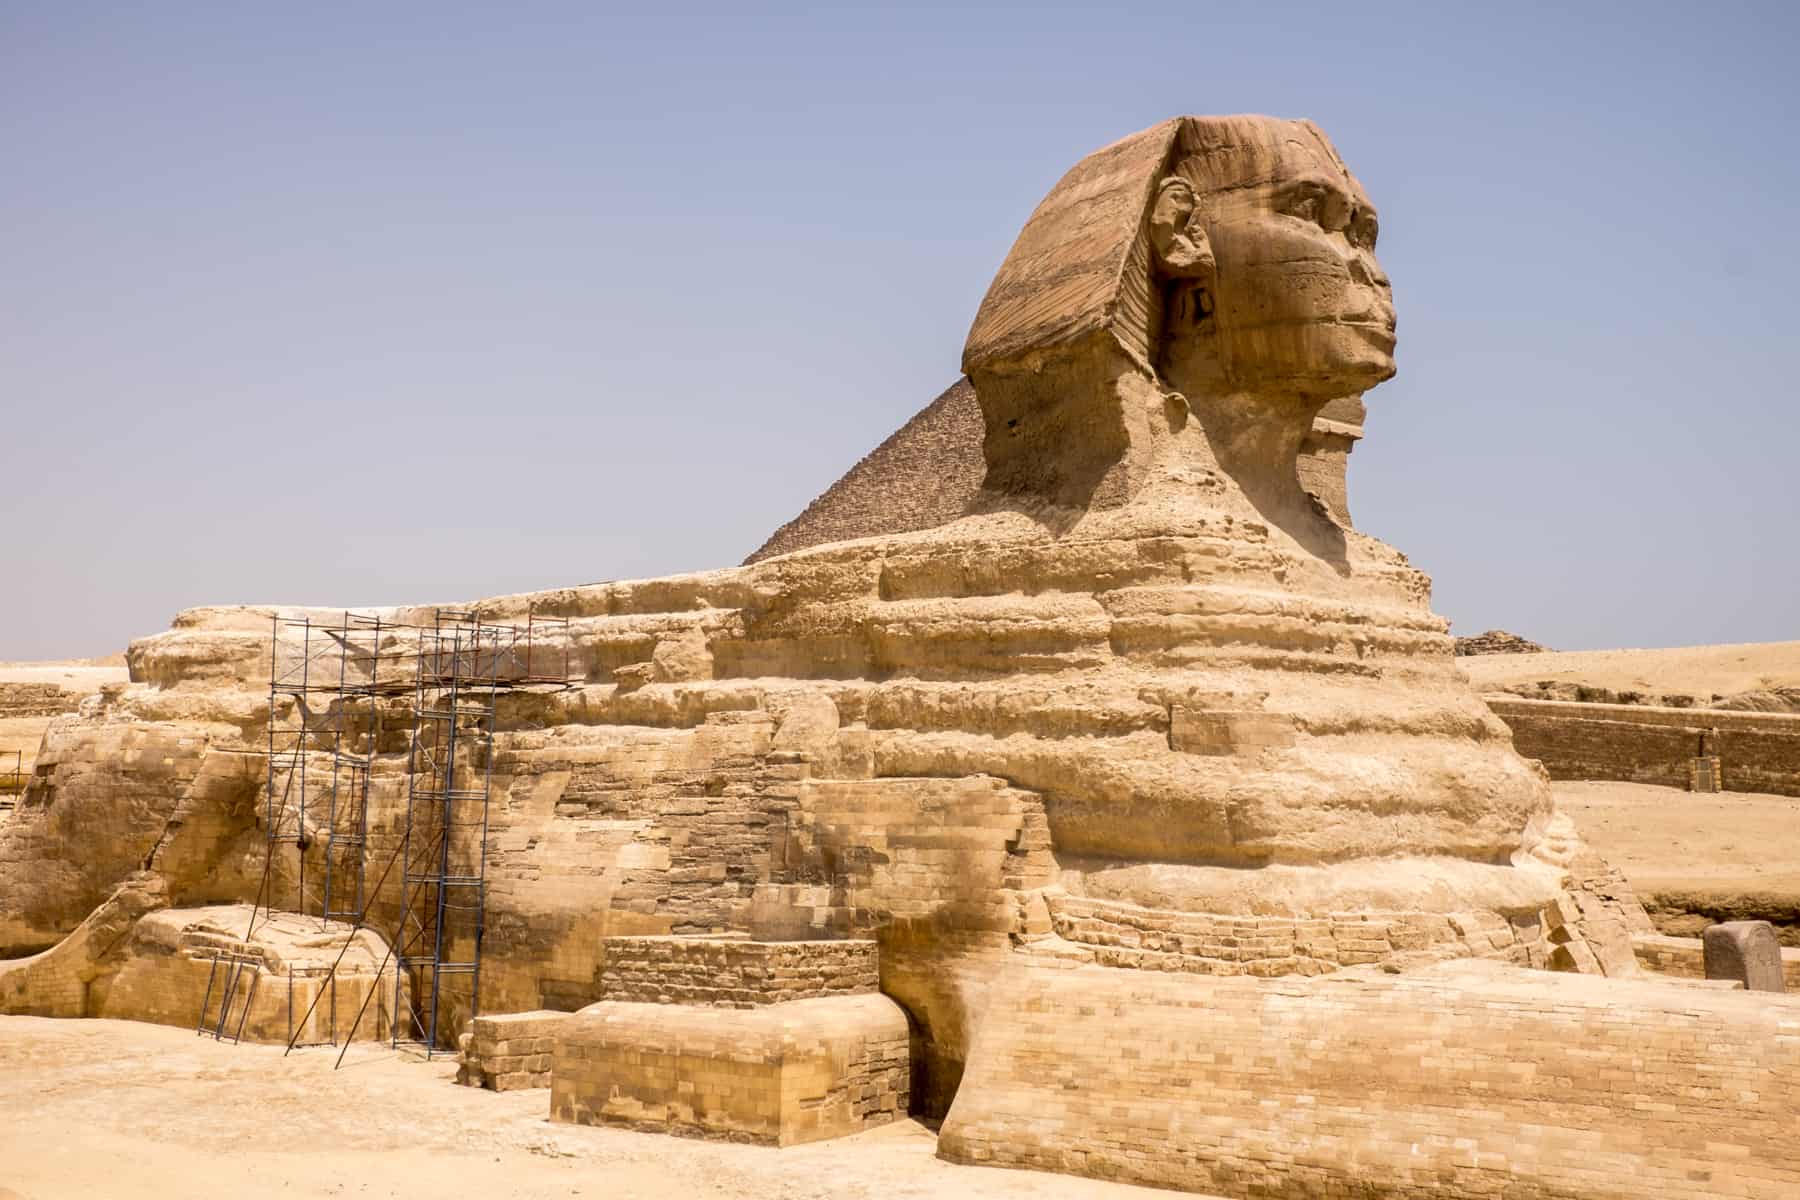 The golden stone tiered, cat and human faced Great Sphinx of Egypt in Giza